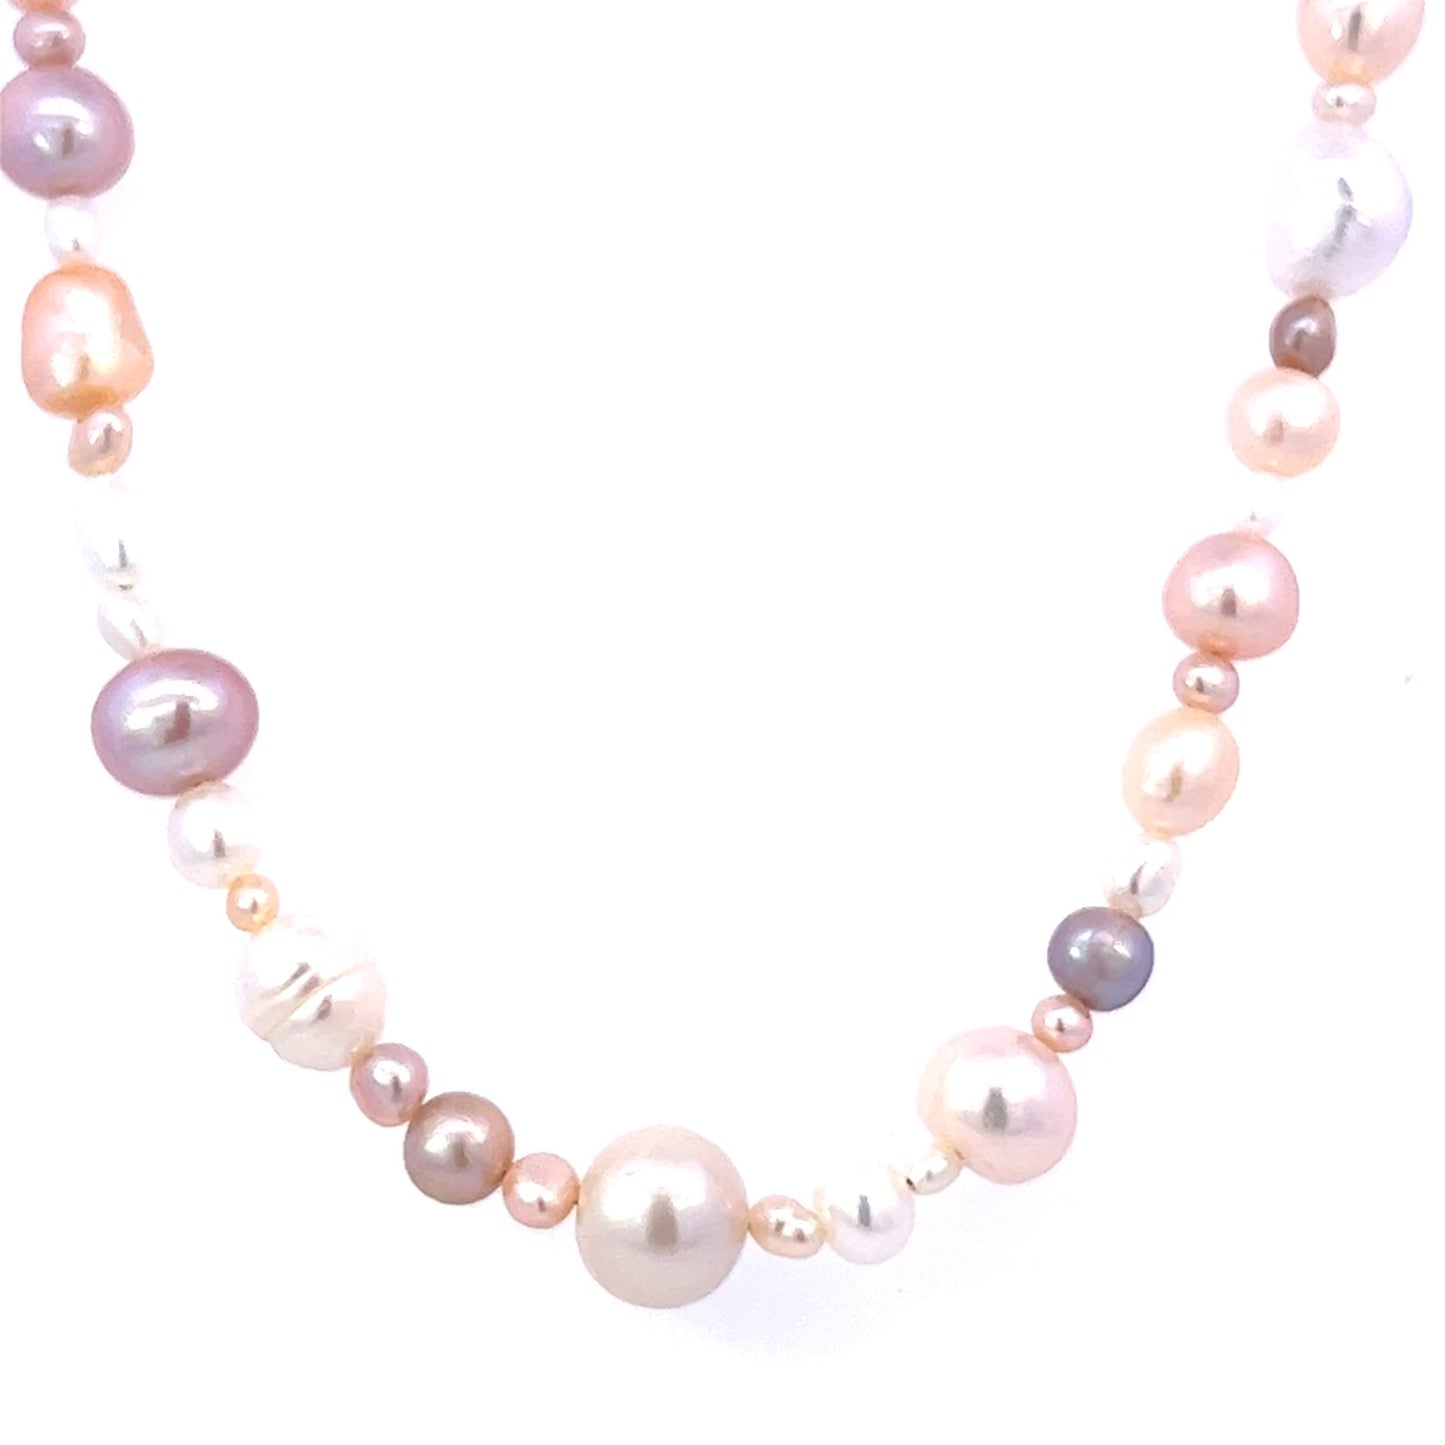 Pearl Necklace, Stretch Bracelet and Earrings Set